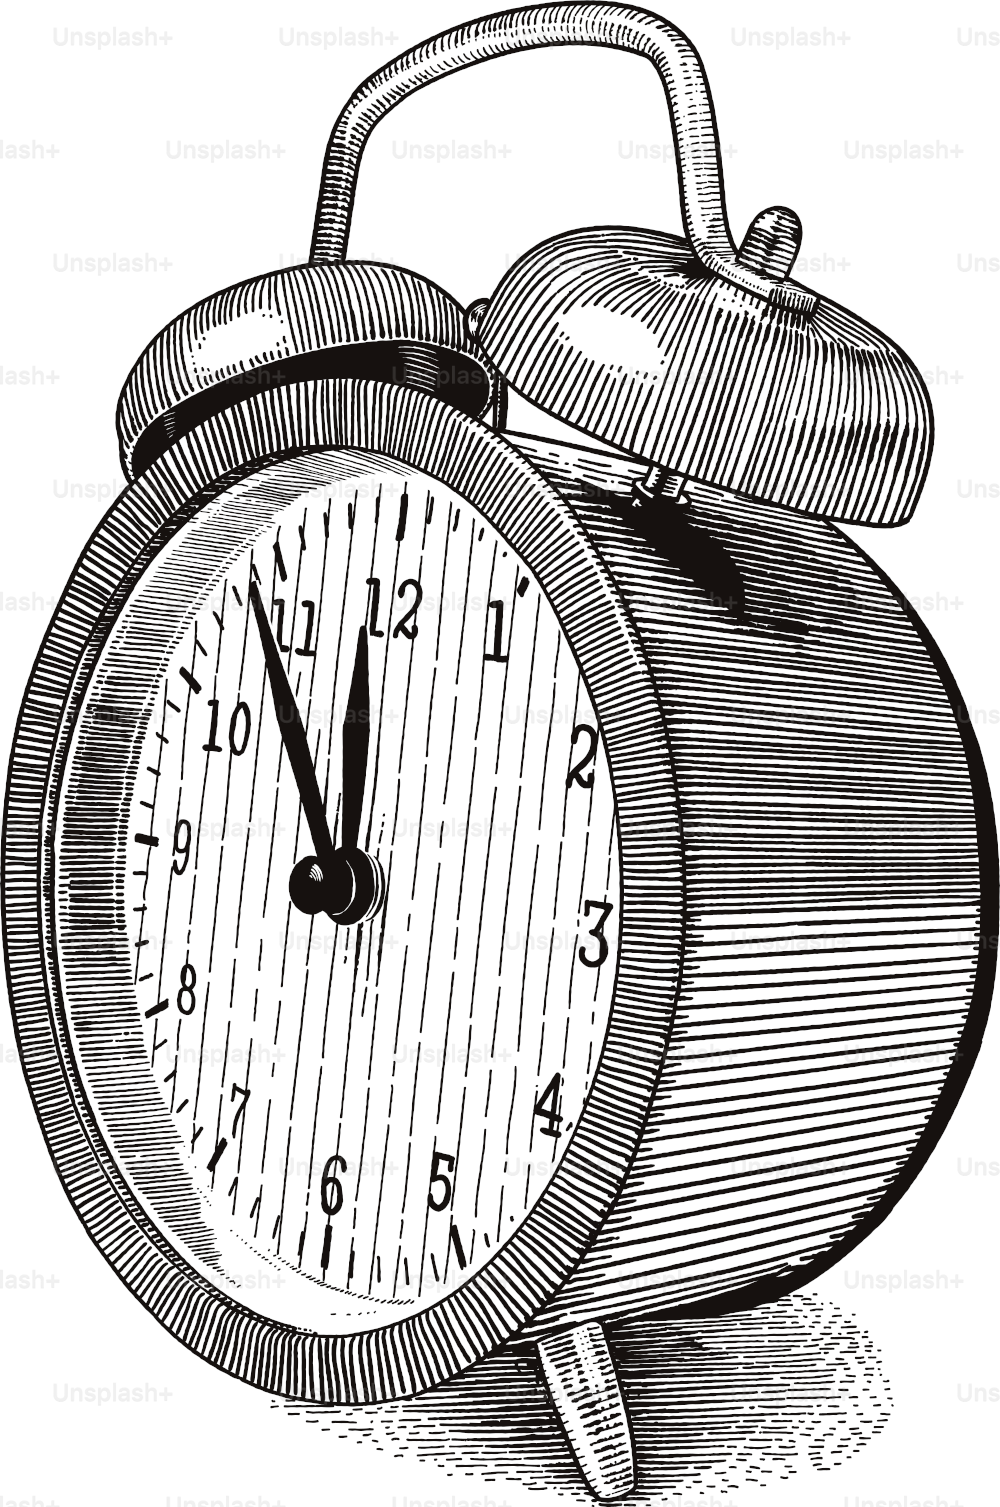 Etching style illustration of old style alarm clock